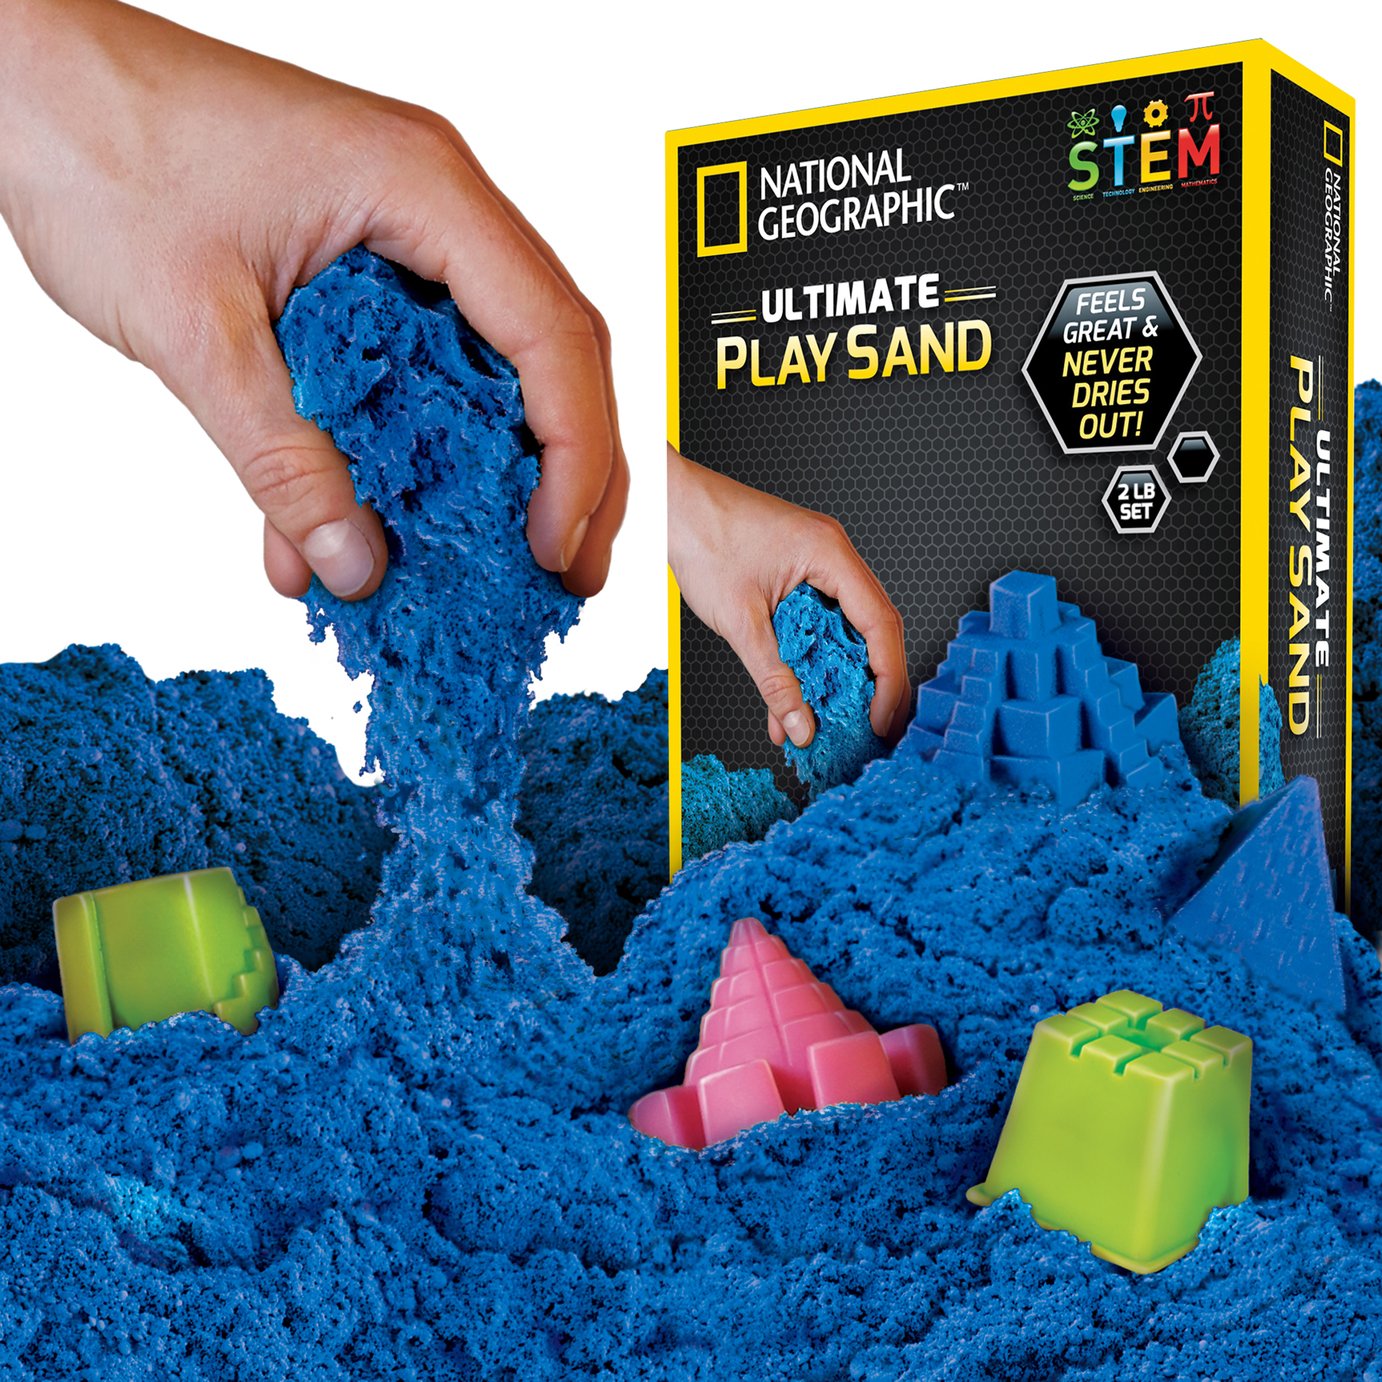 National Geographic Ultimate Play Sand Assortment Review